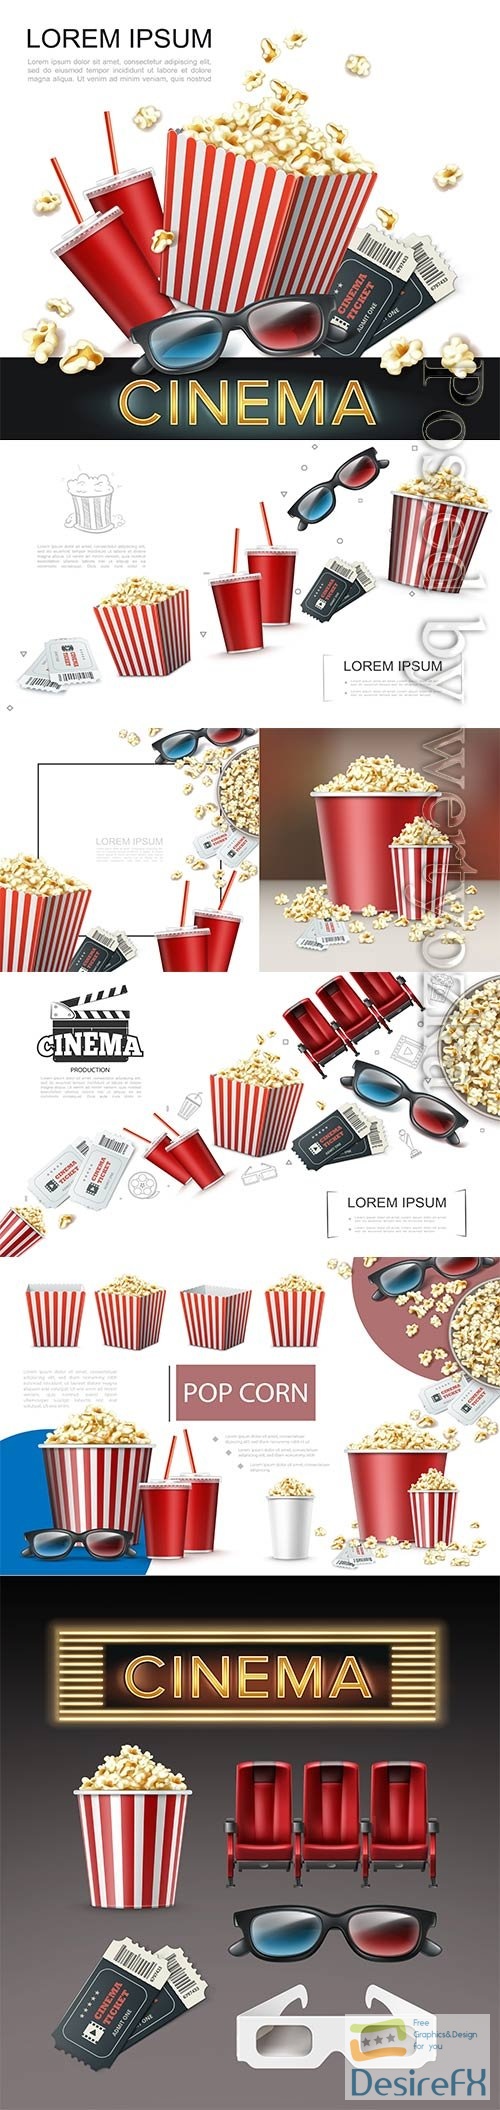 Realistic cinema elements, 3d glasses, tickets, soda, cups striped, paper box and bucket of popcorn